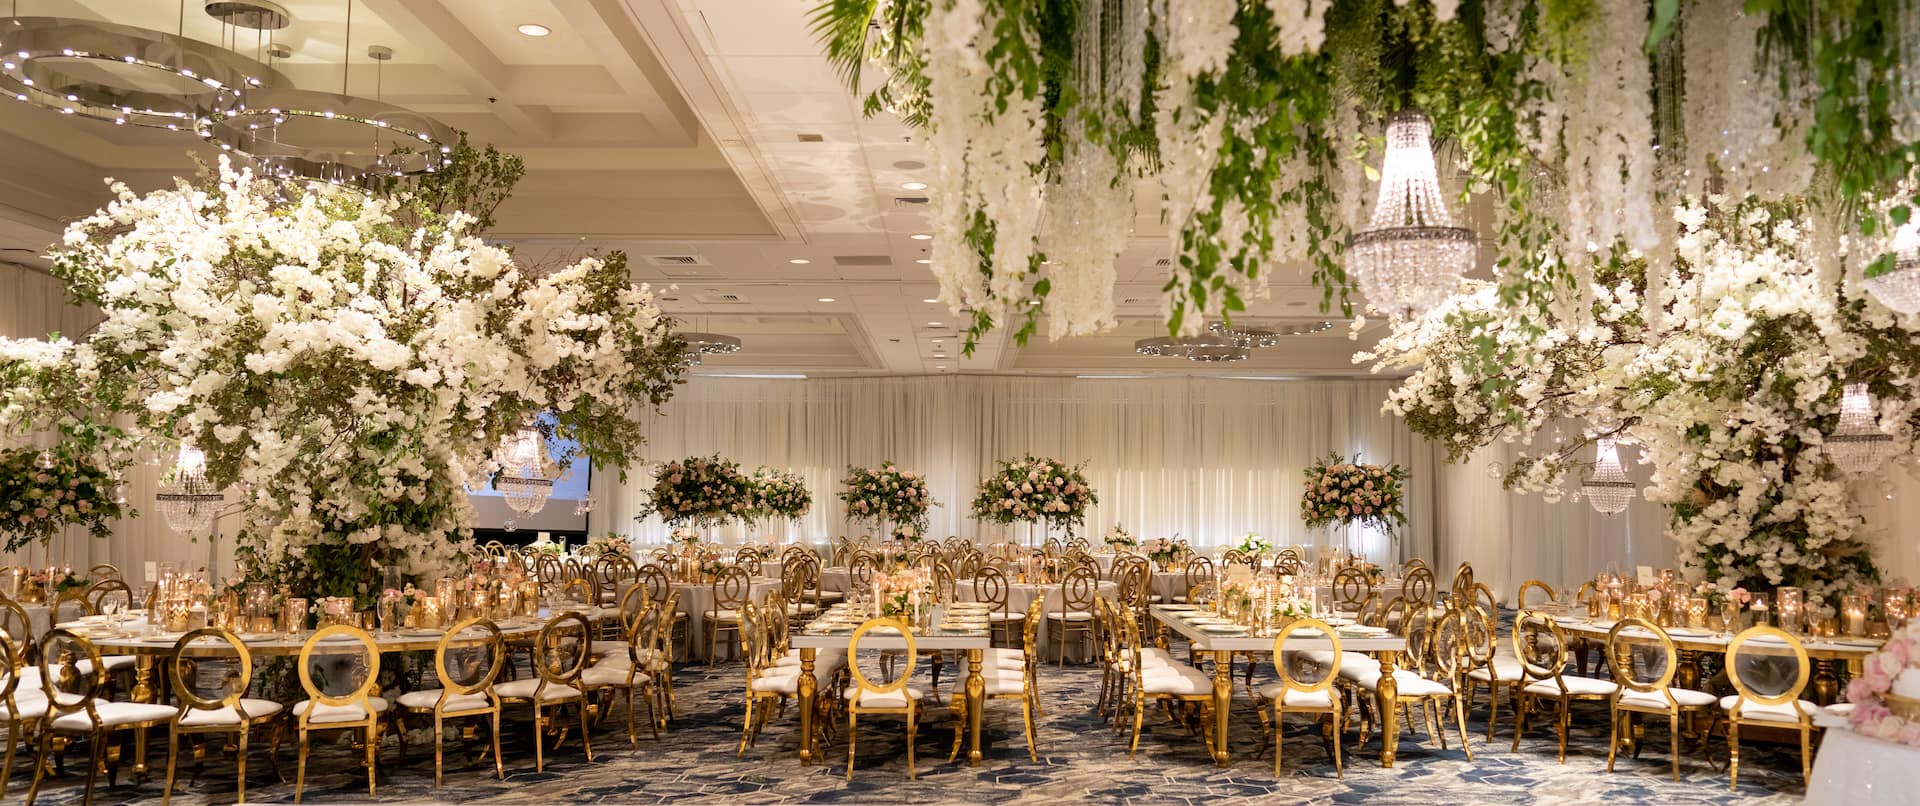 Weddings, ballroom reception tables and hanging flowers